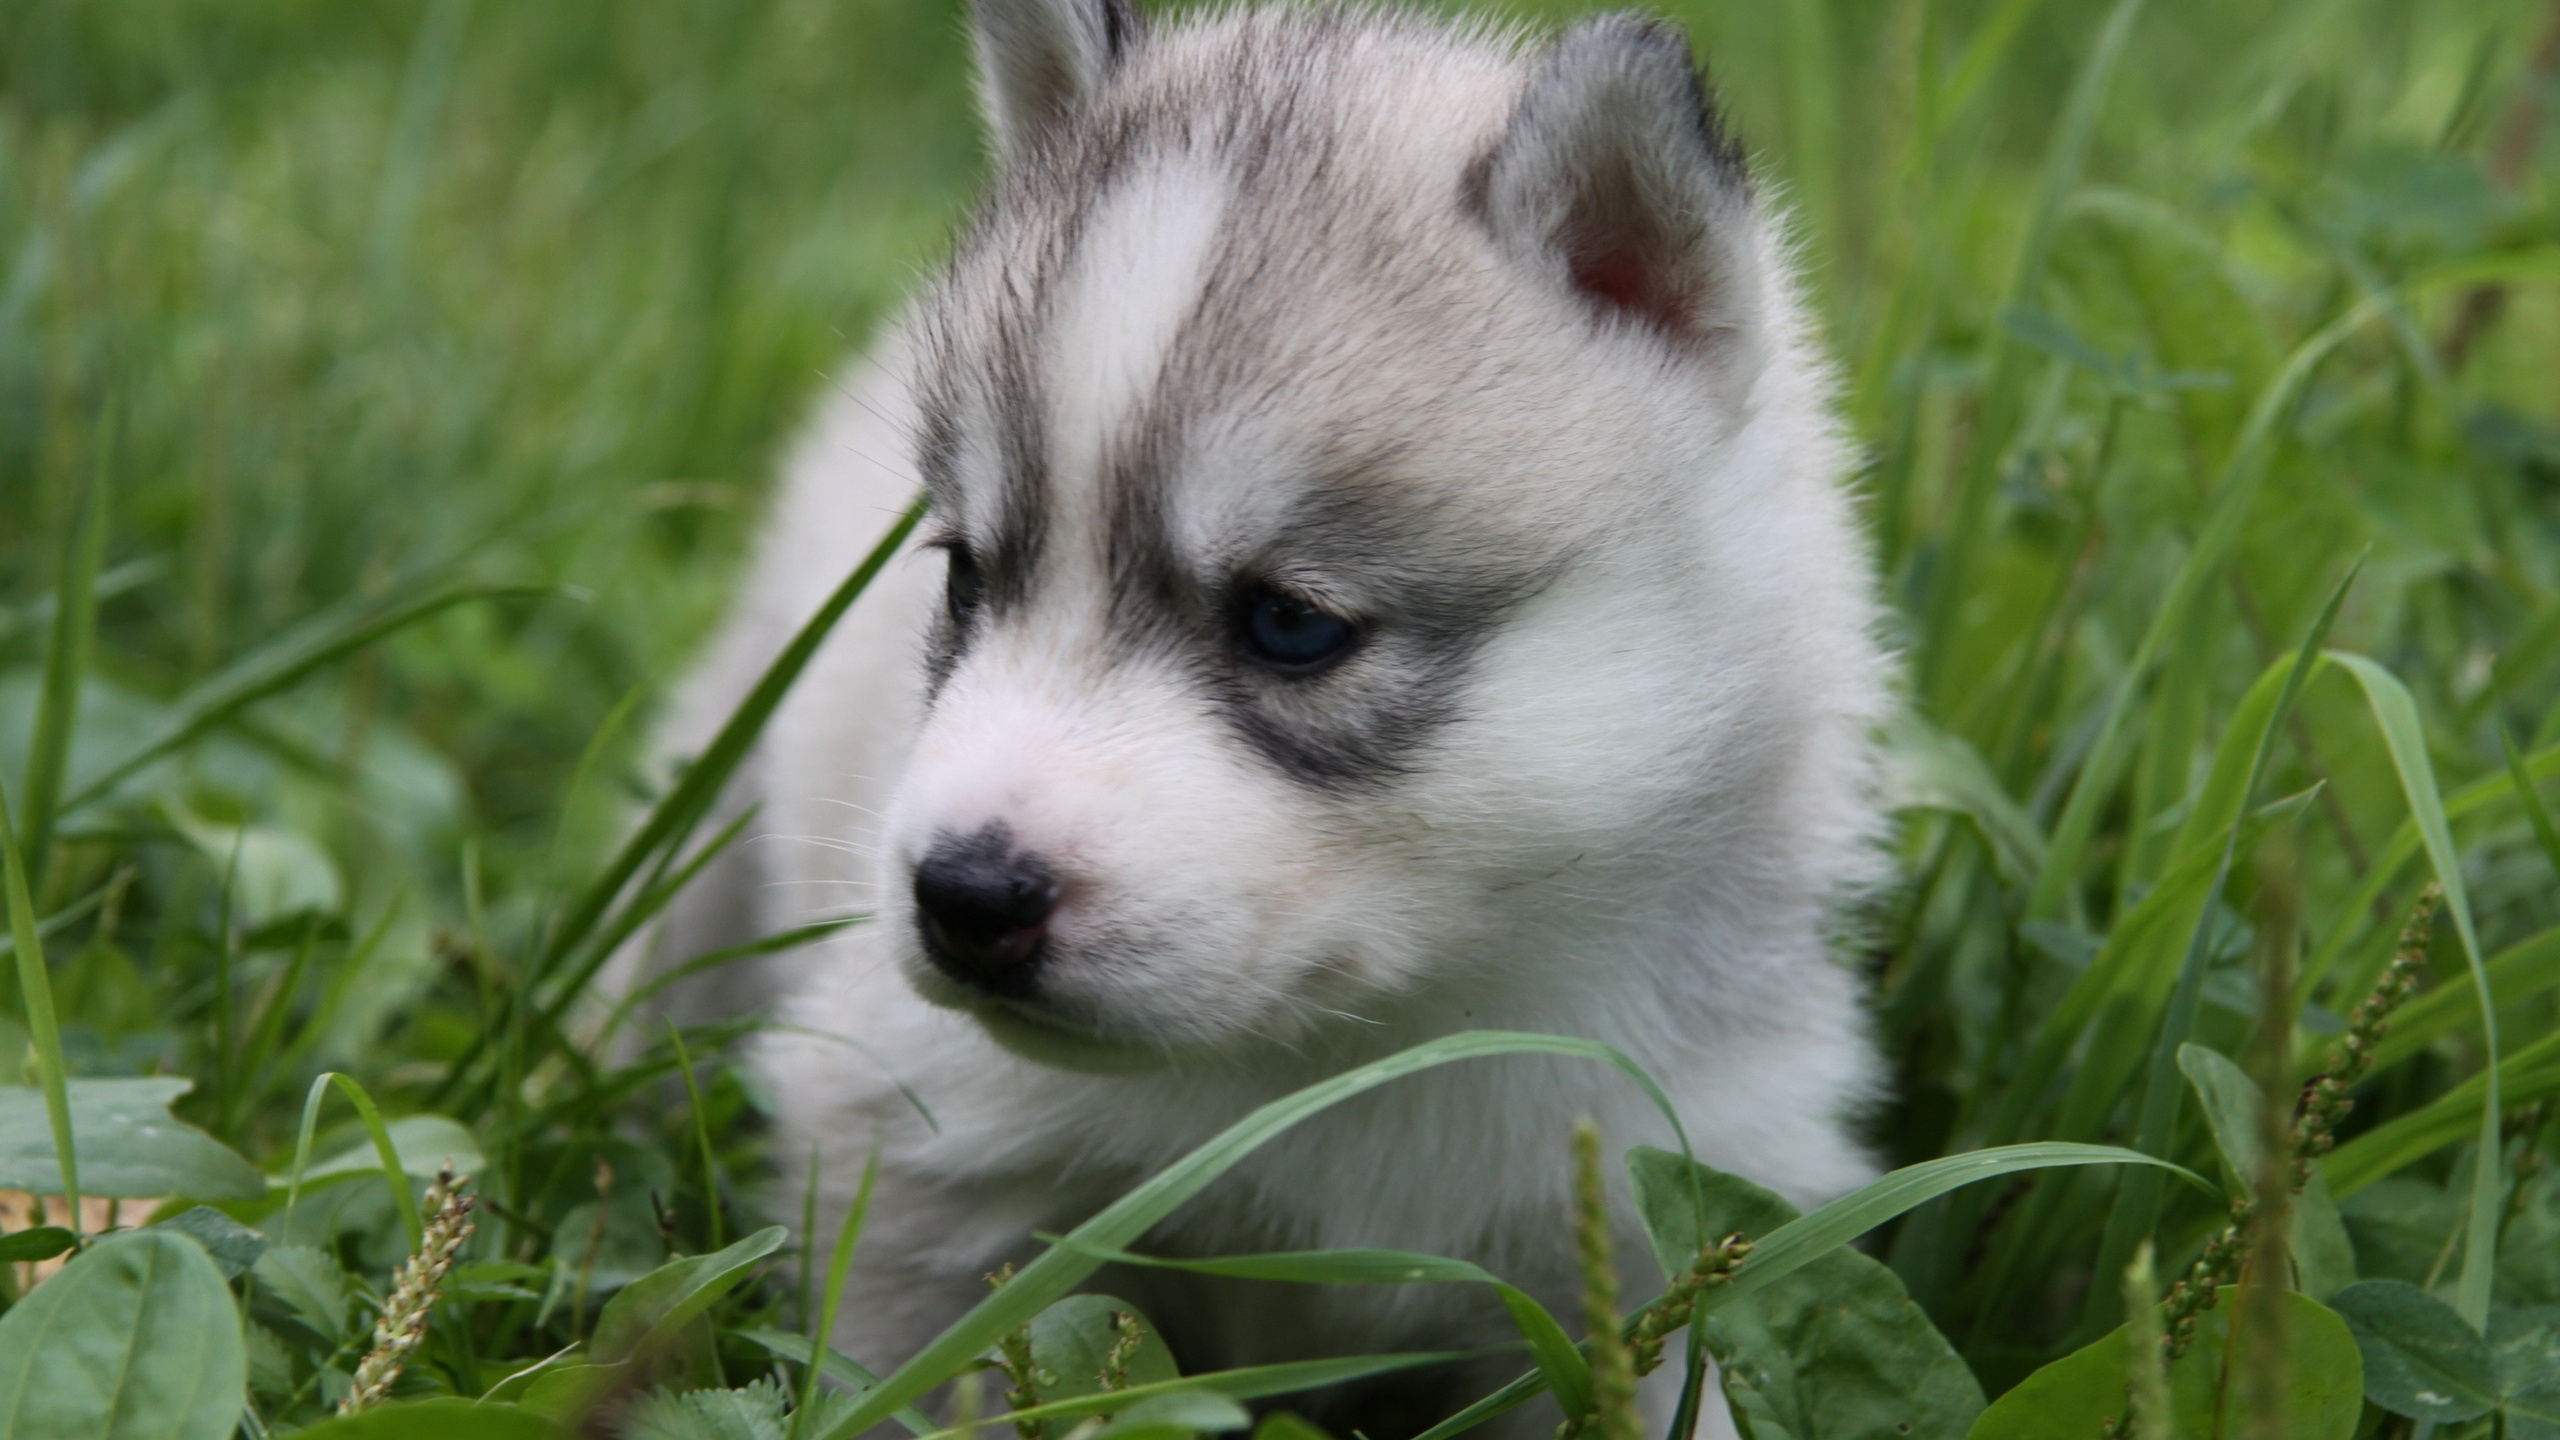 White and Black Siberian Husky Puppy on Green Grass During Daytime. Wallpaper in 2560x1440 Resolution